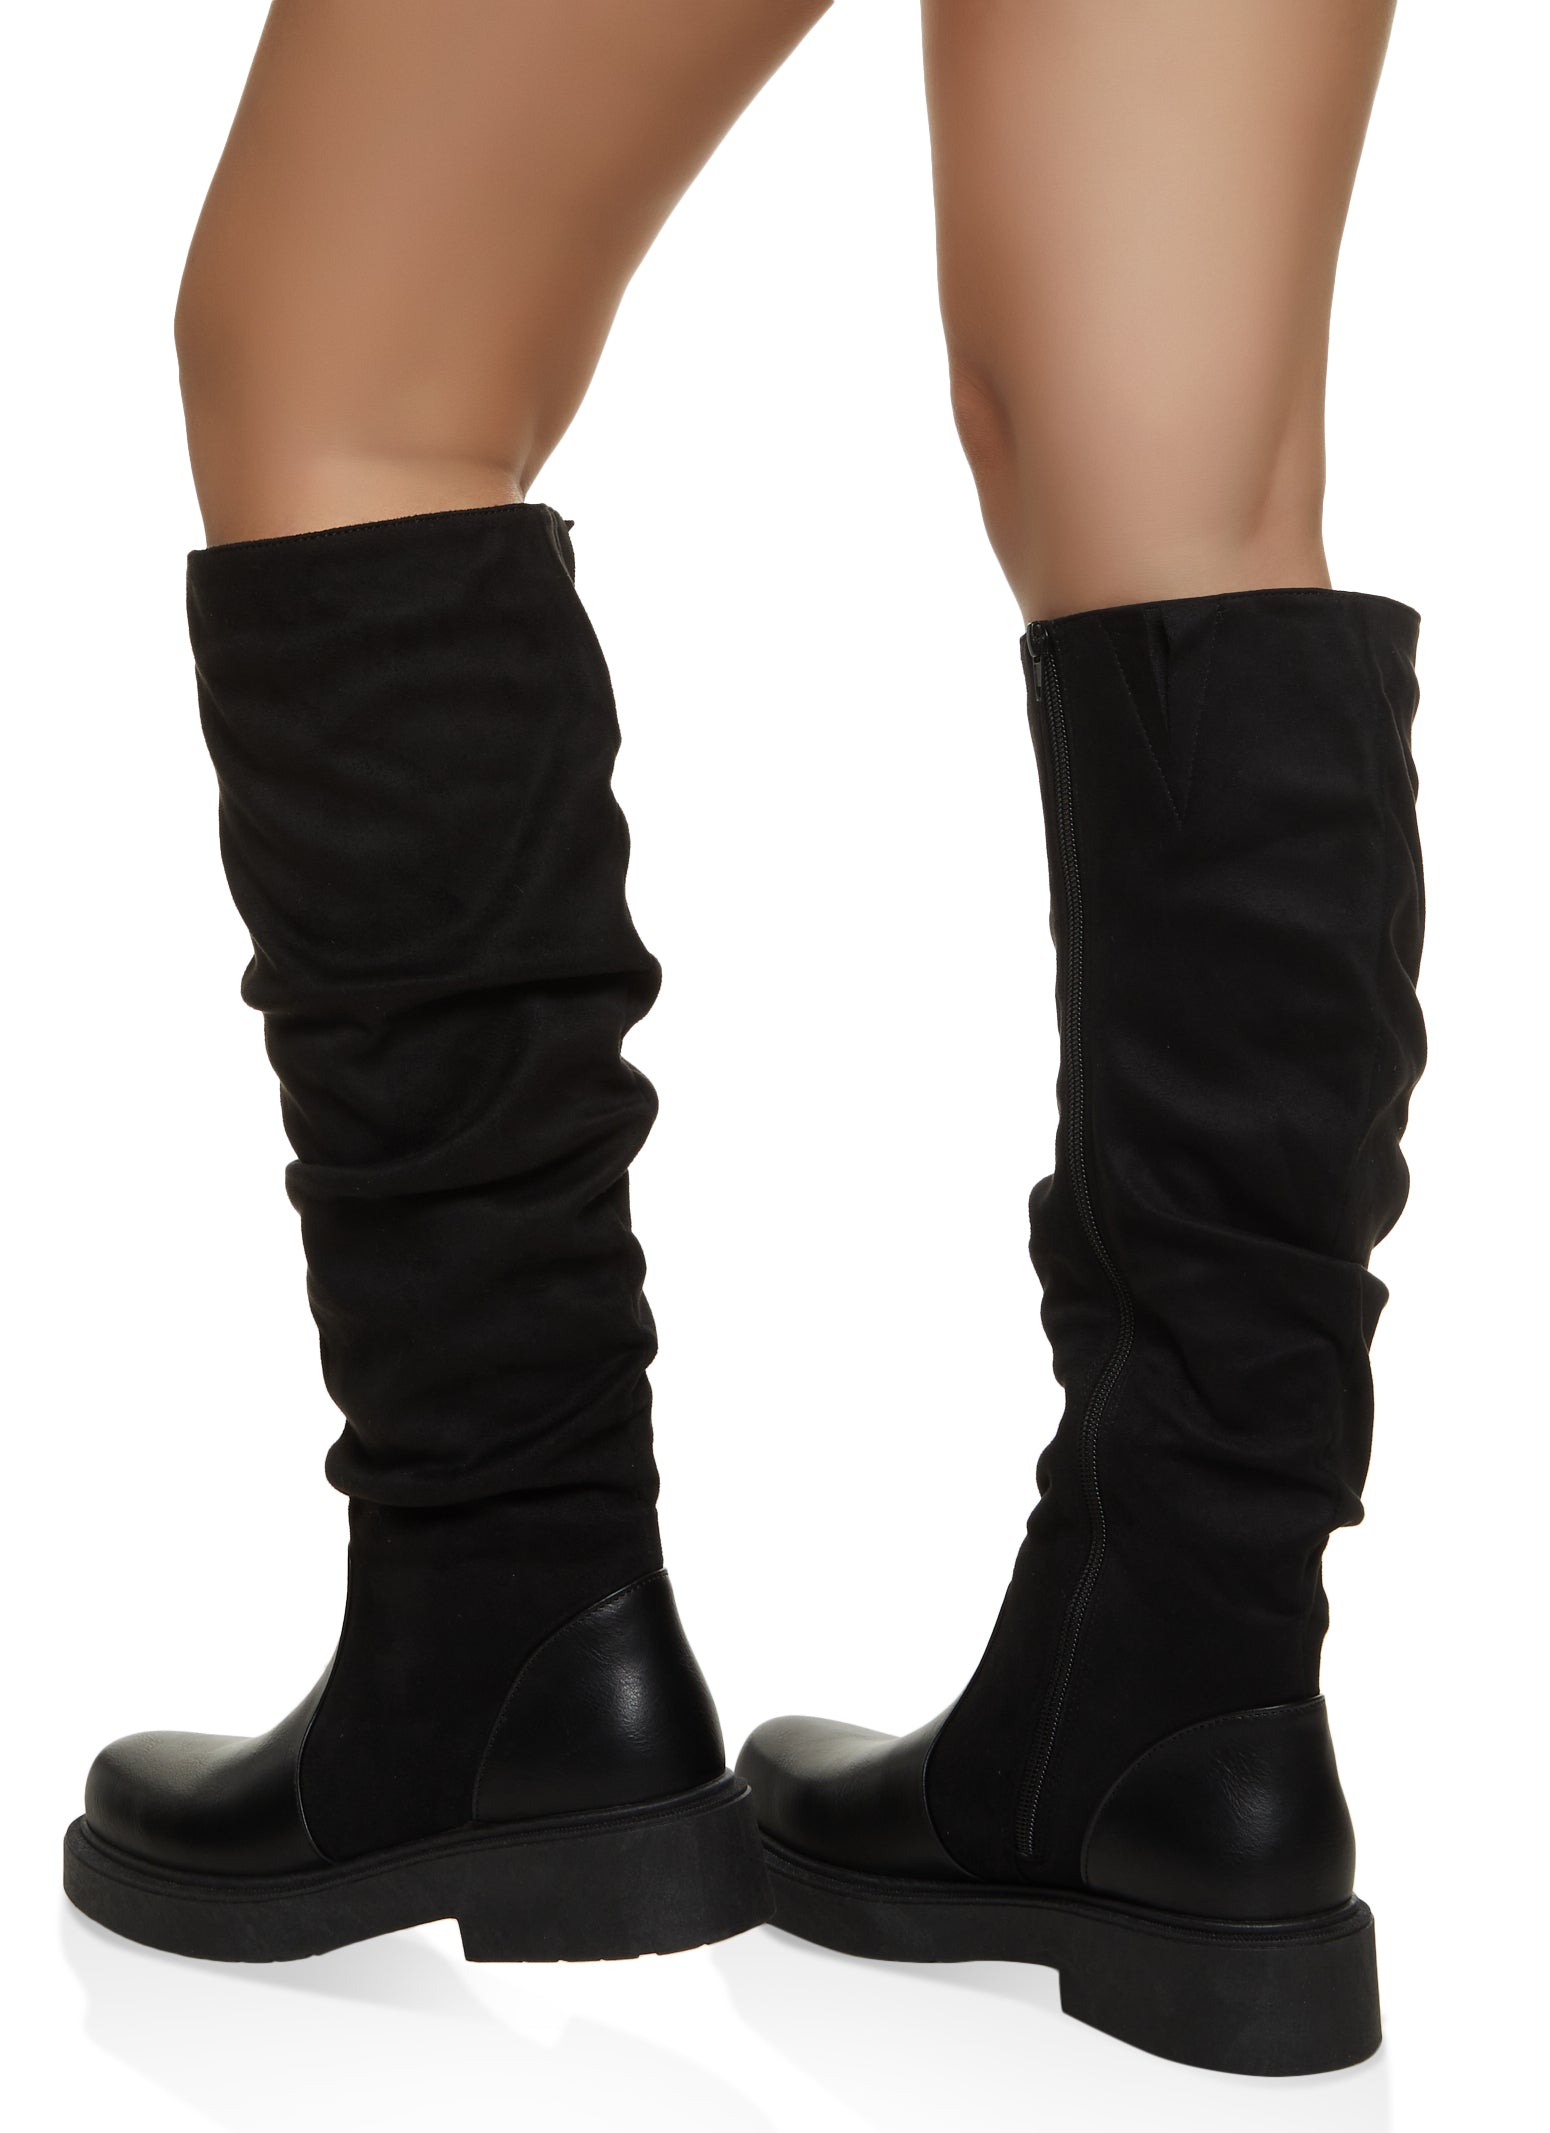 Black Suede Platform Knee High Boots | Womens | 11 (Available in 9, 8.5, 8, 7.5, 7, 6.5, 6, 5.5, 10) | Lulus Exclusive | Tall Boots